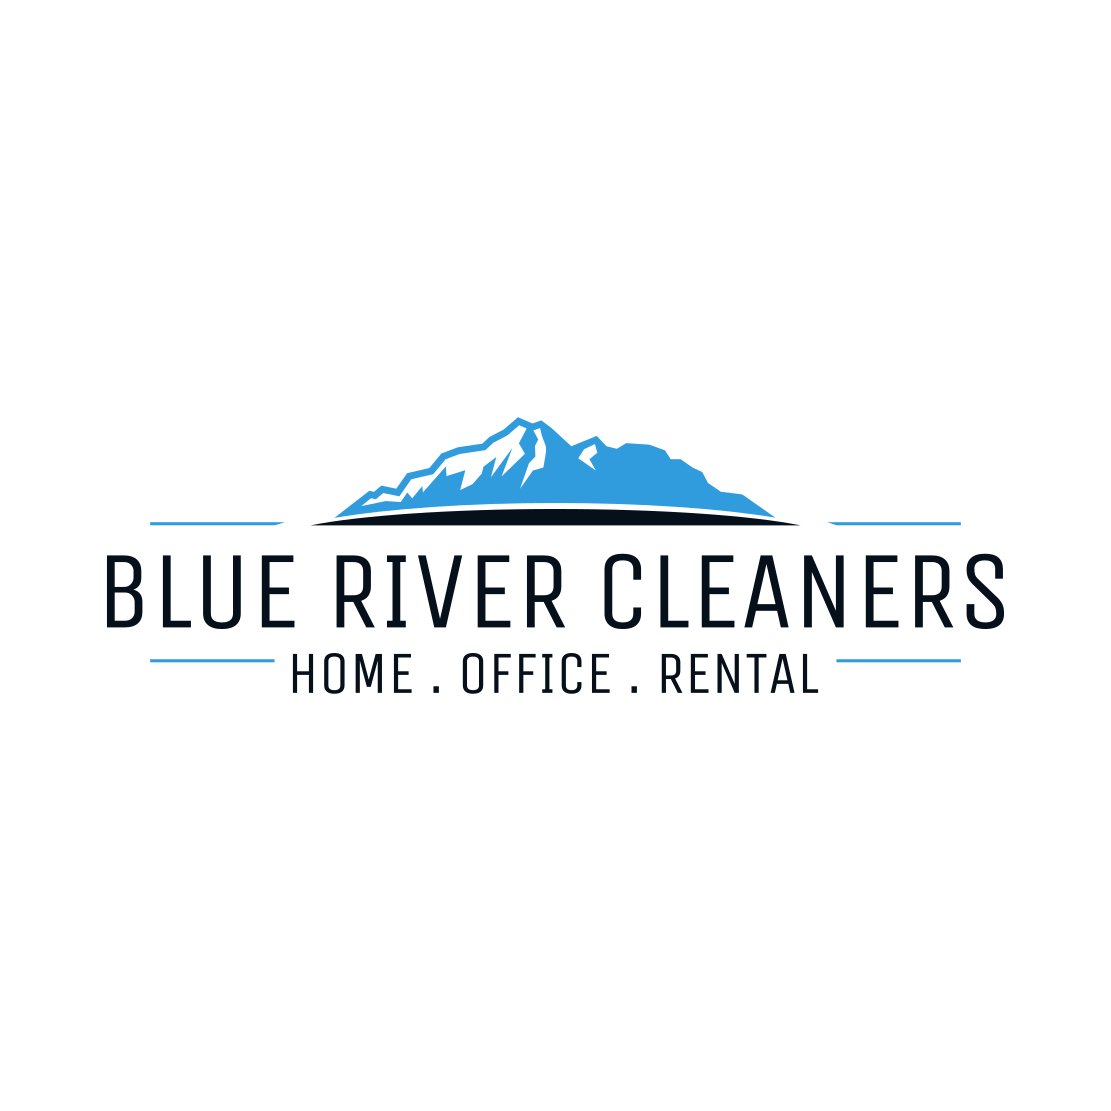 Blue River Cleaners